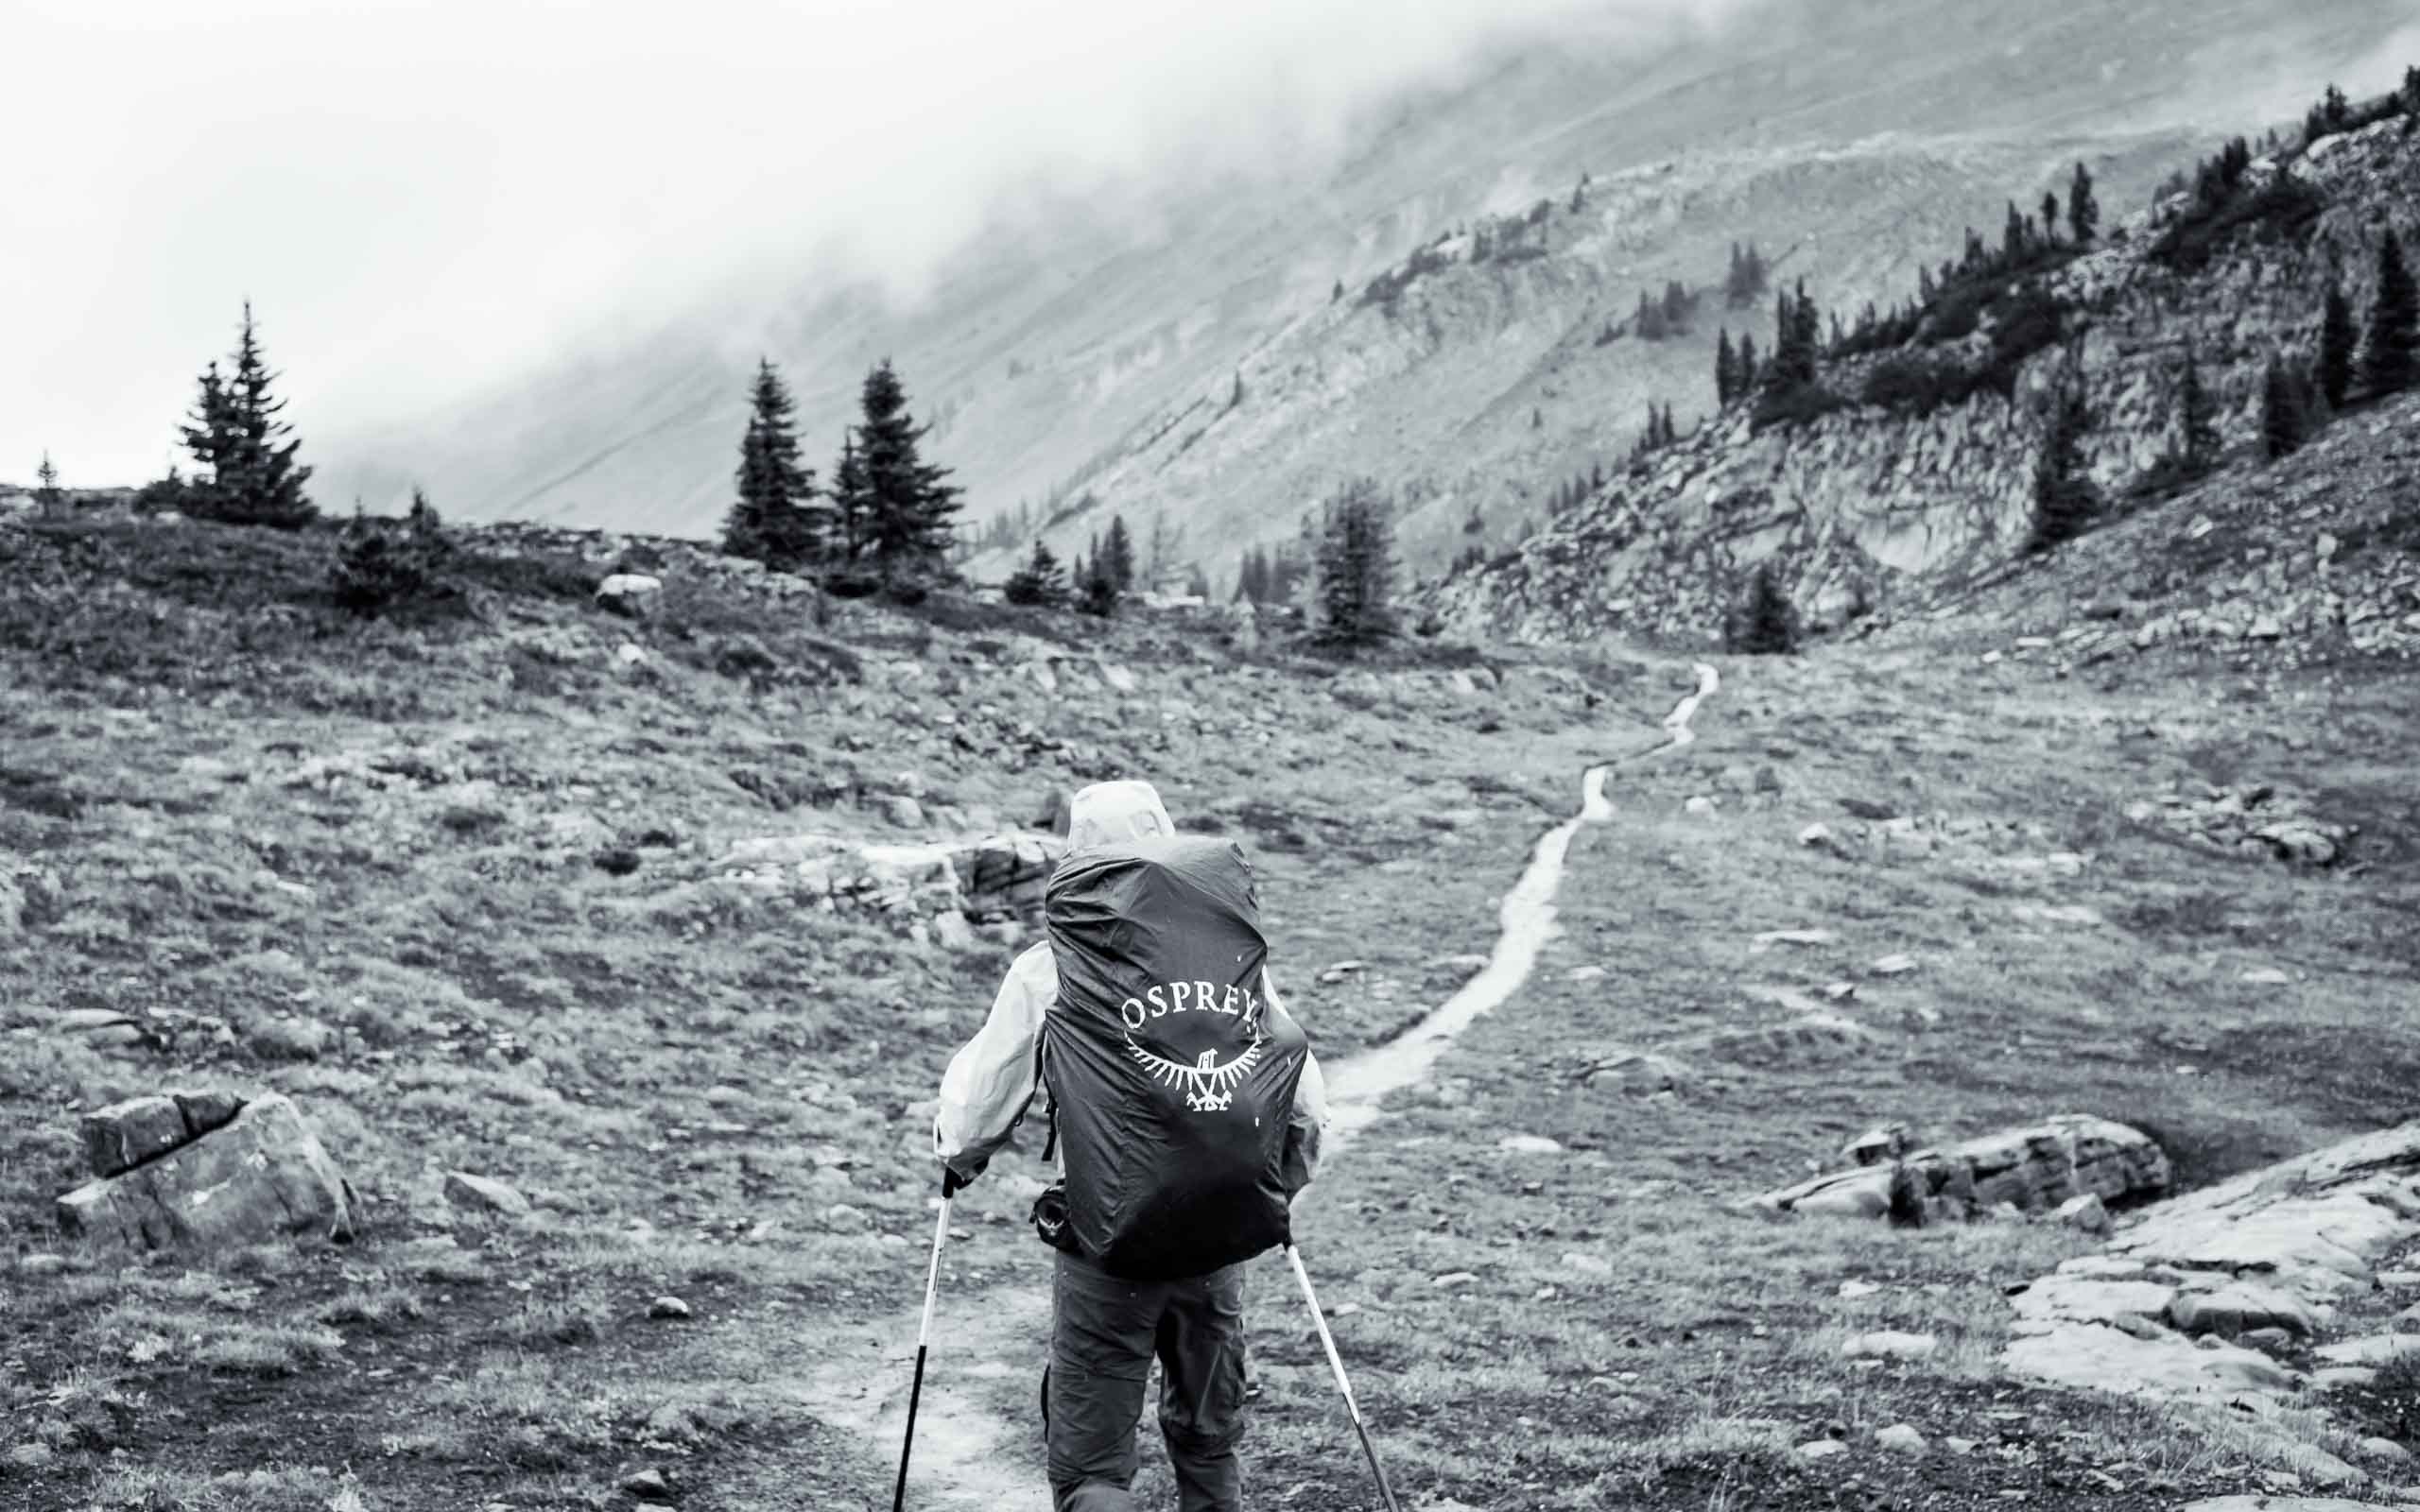 Marketing Image Content. Branding photography featuring an Osprey Backpack being worn on a hiking trail